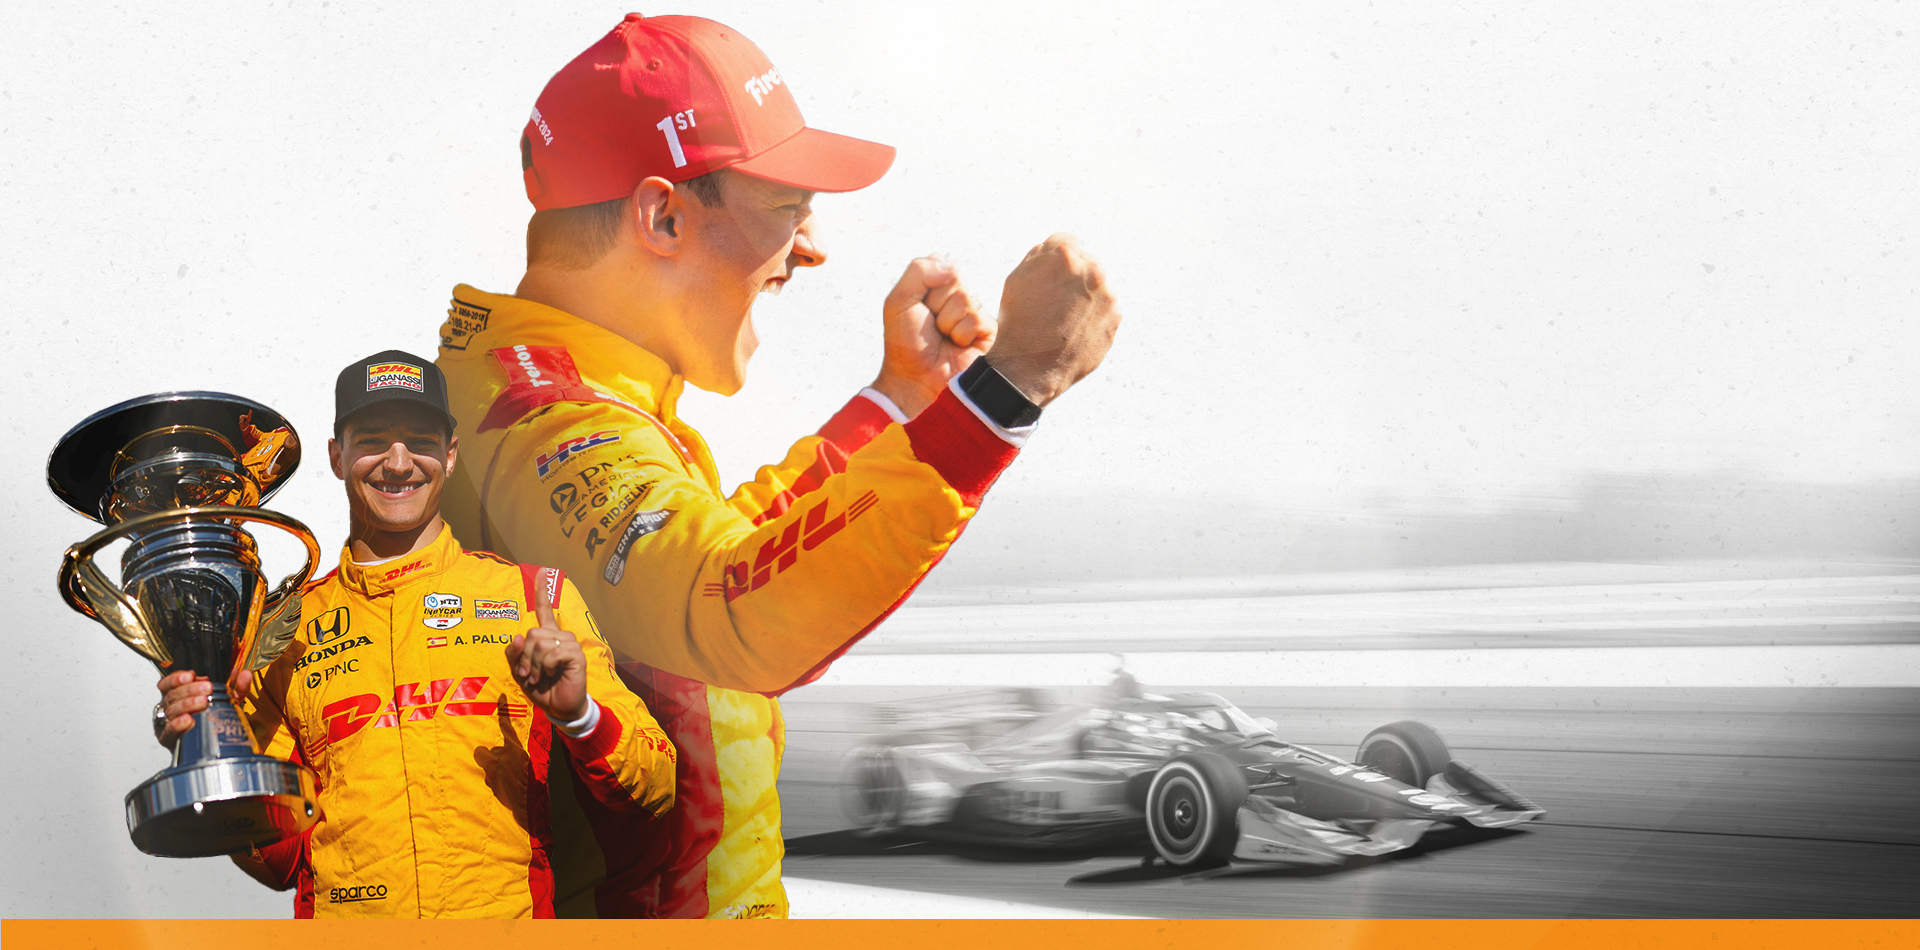 A composited image showing Alex Palou celebrating victory in the 2023 Sonsio Grand Prix with a shot of his #10 car on track in the background